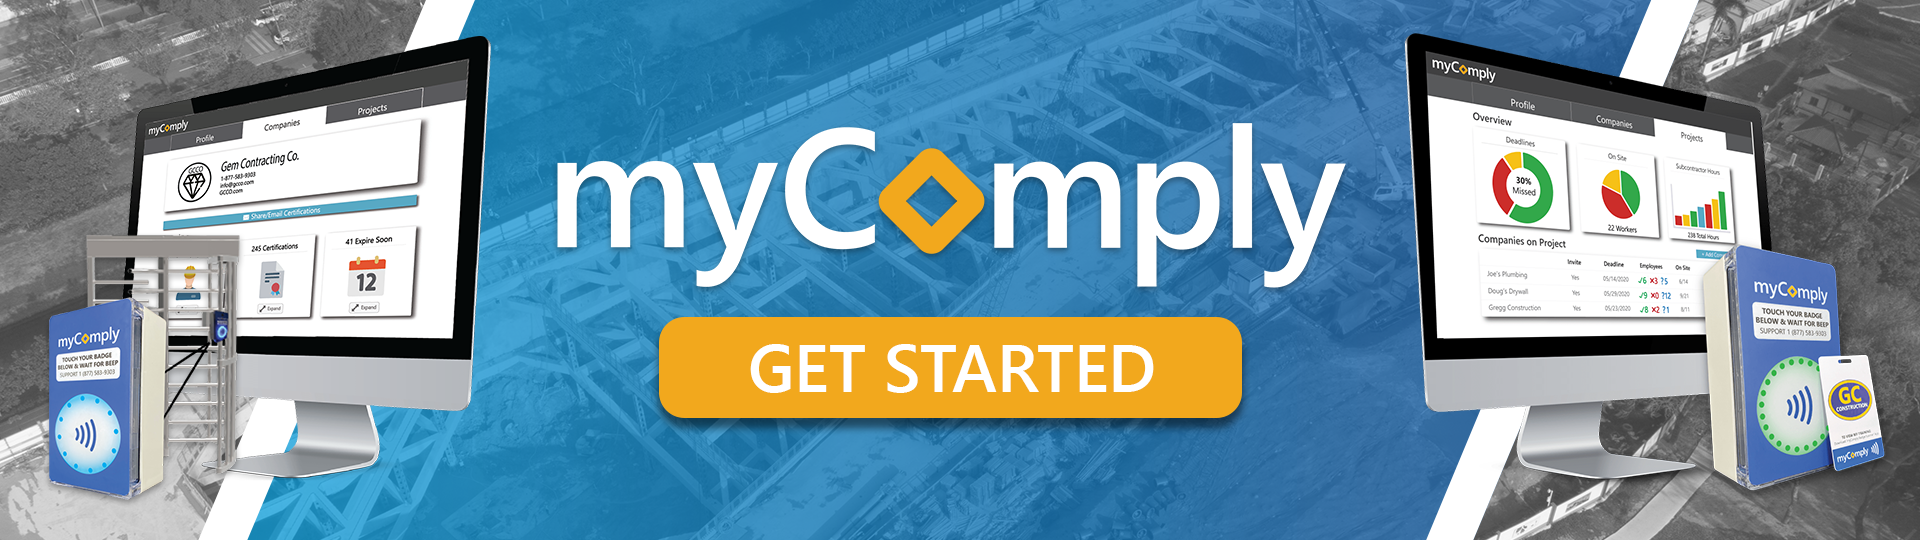 mycomply get started banner